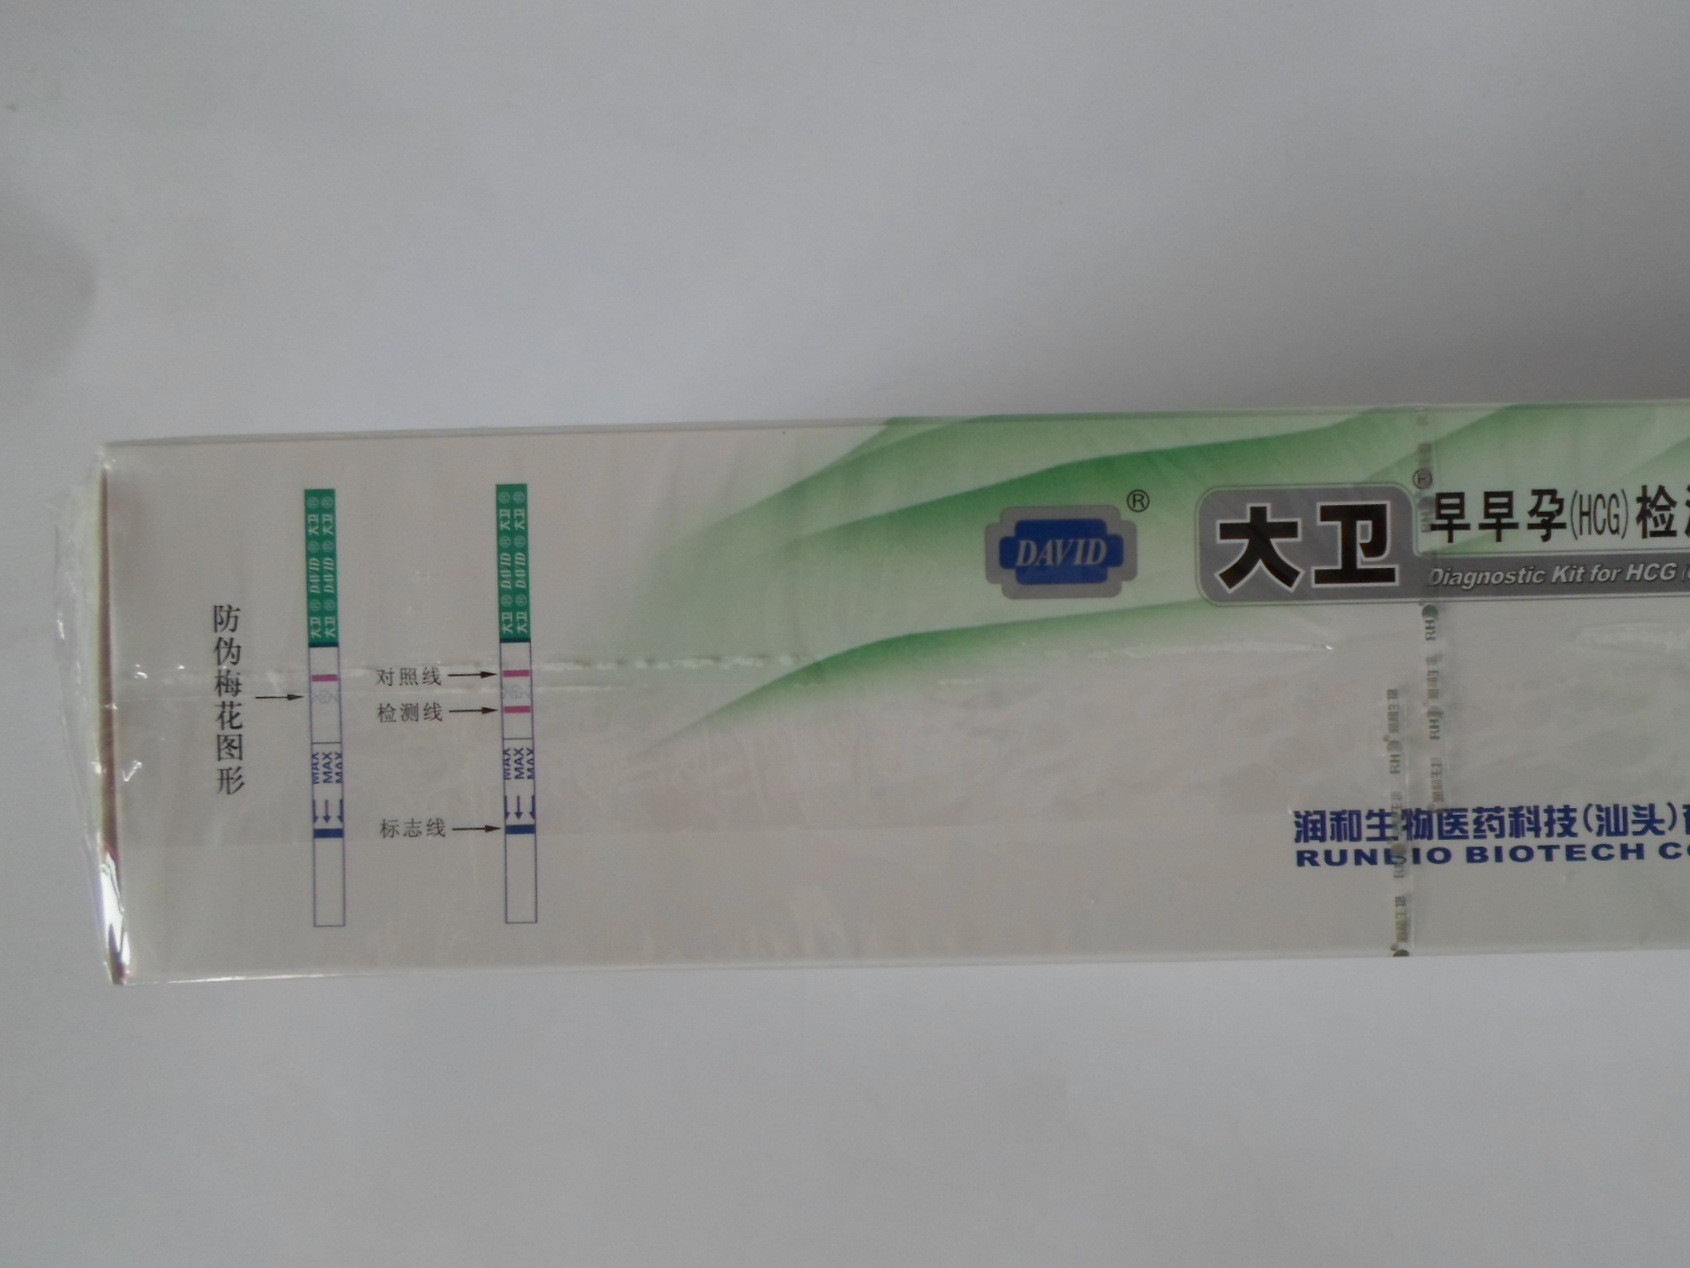 Supply David's early pregnancy test paper 100 a box of 5000 a piece